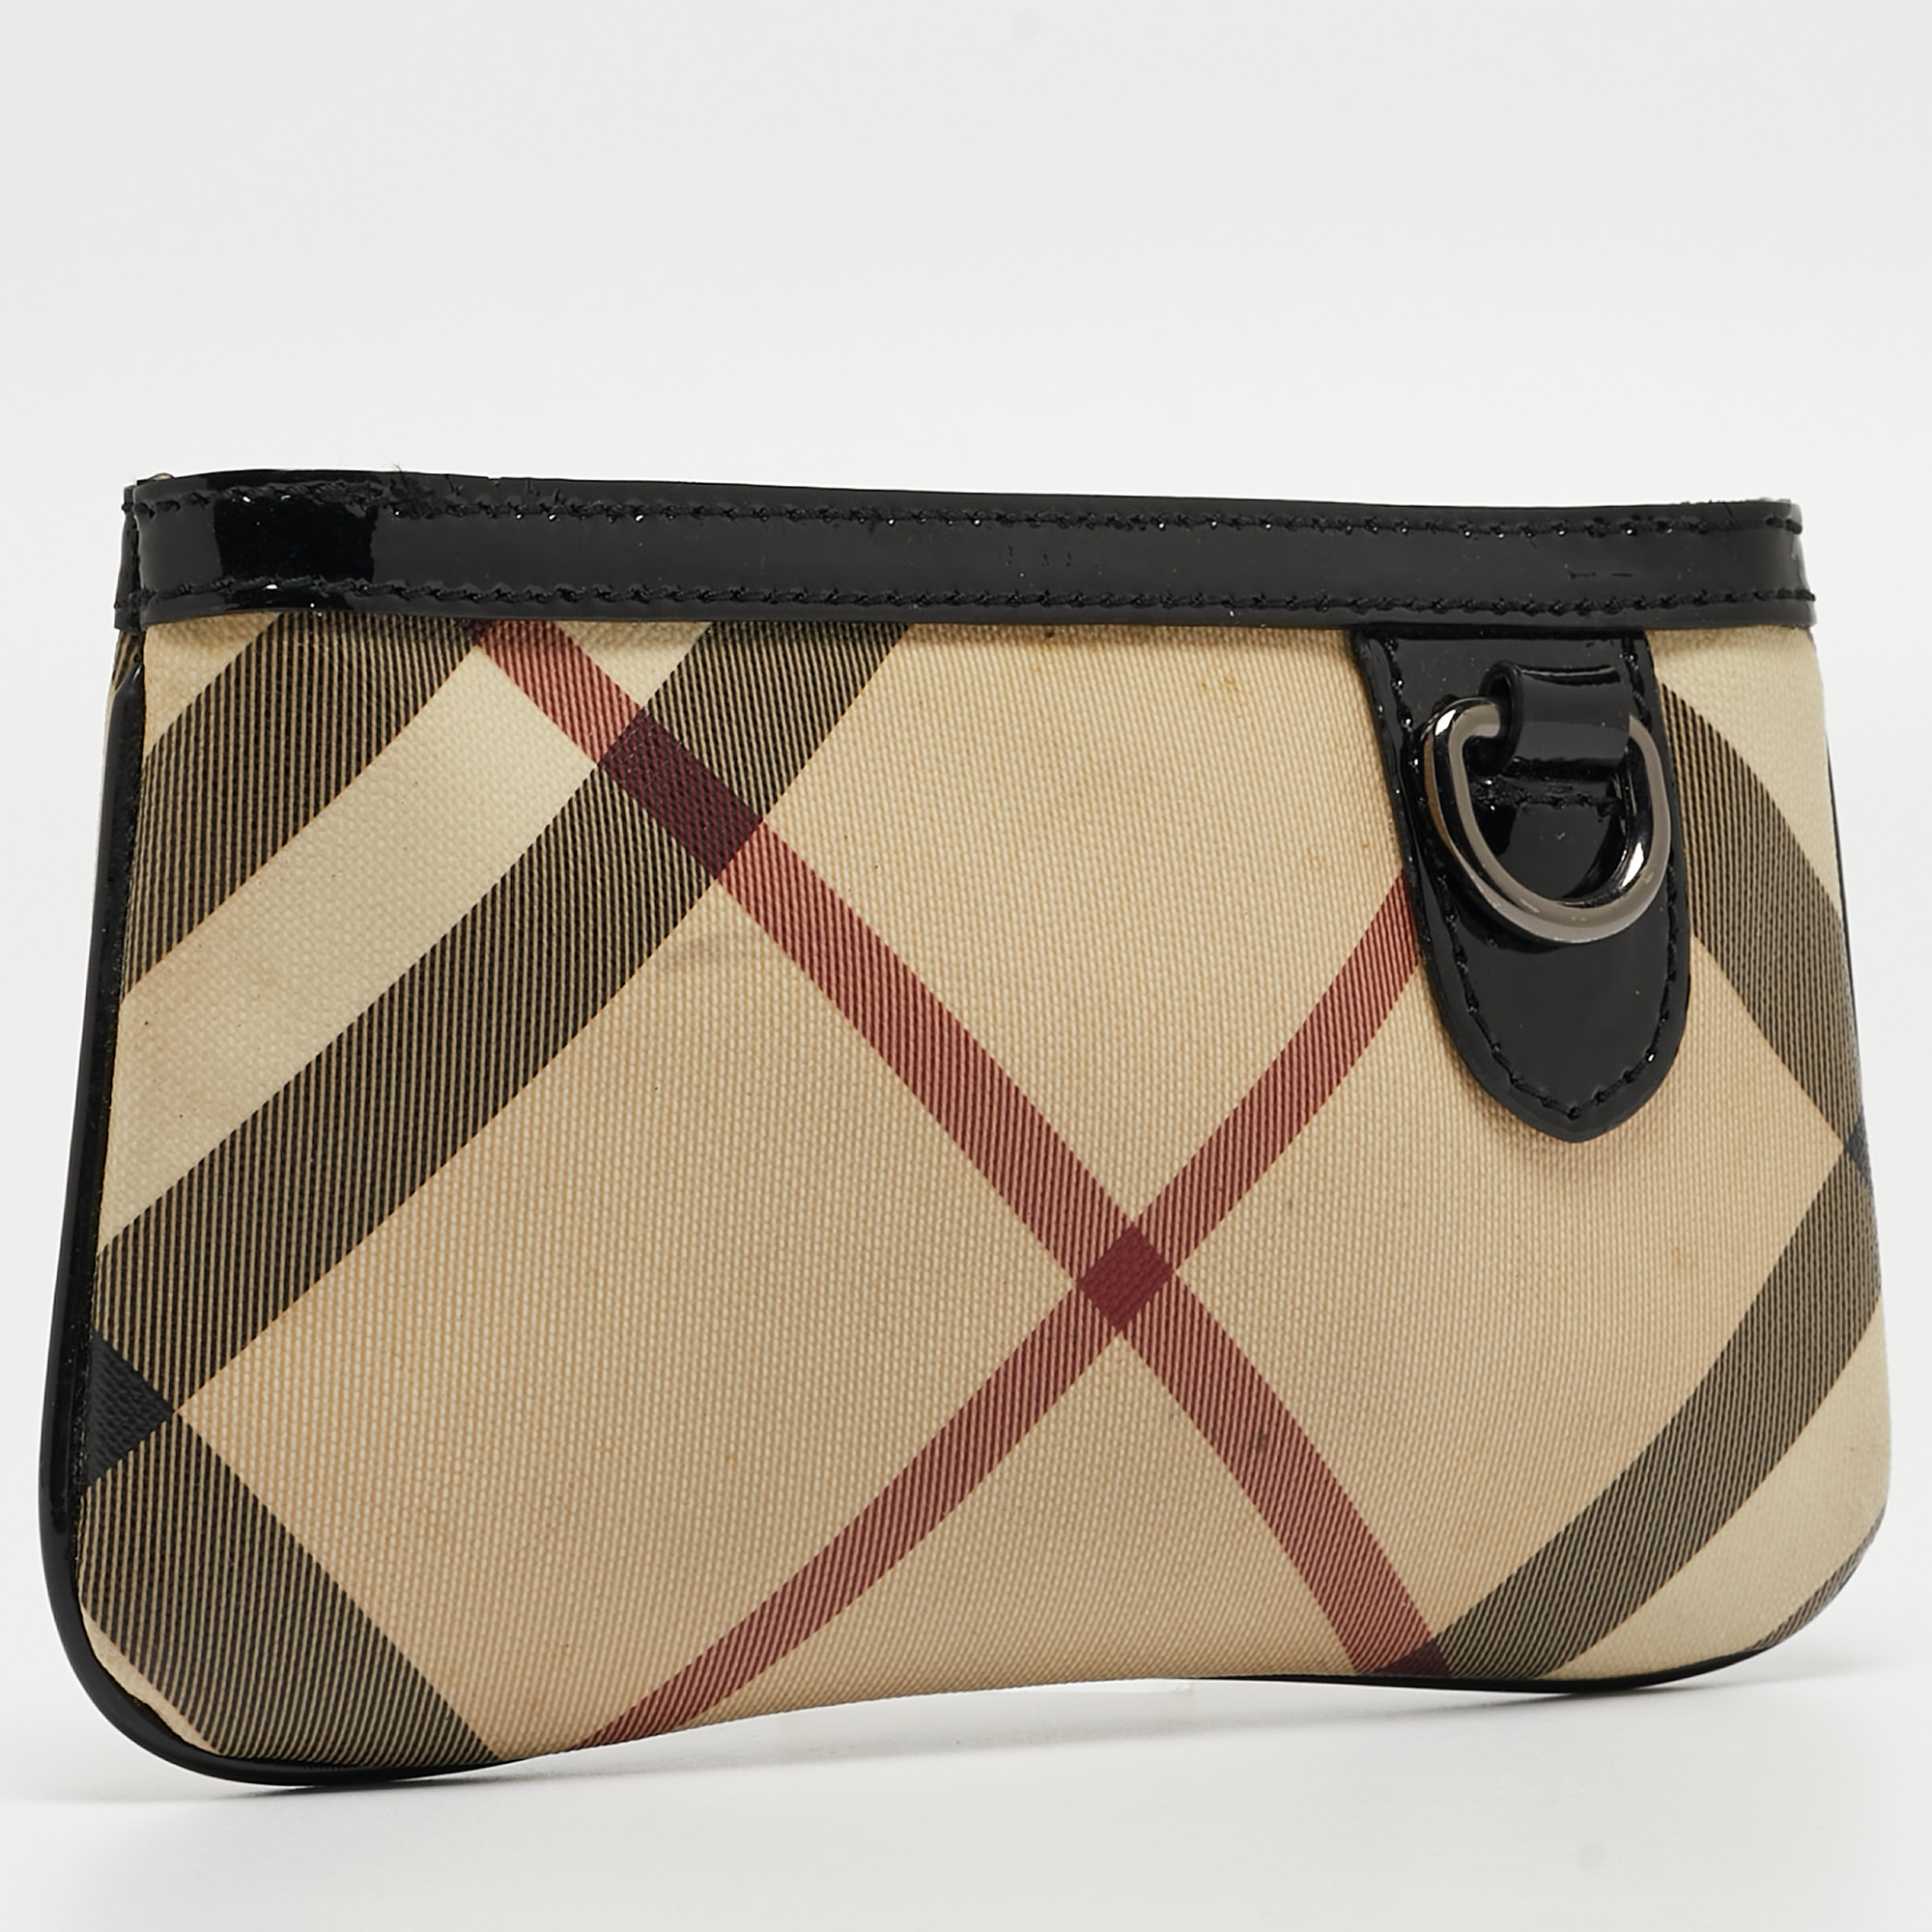 Burberry Beige/Black Nova Check Coated Canvas And Patent Leather Zip Wristlet Clutch